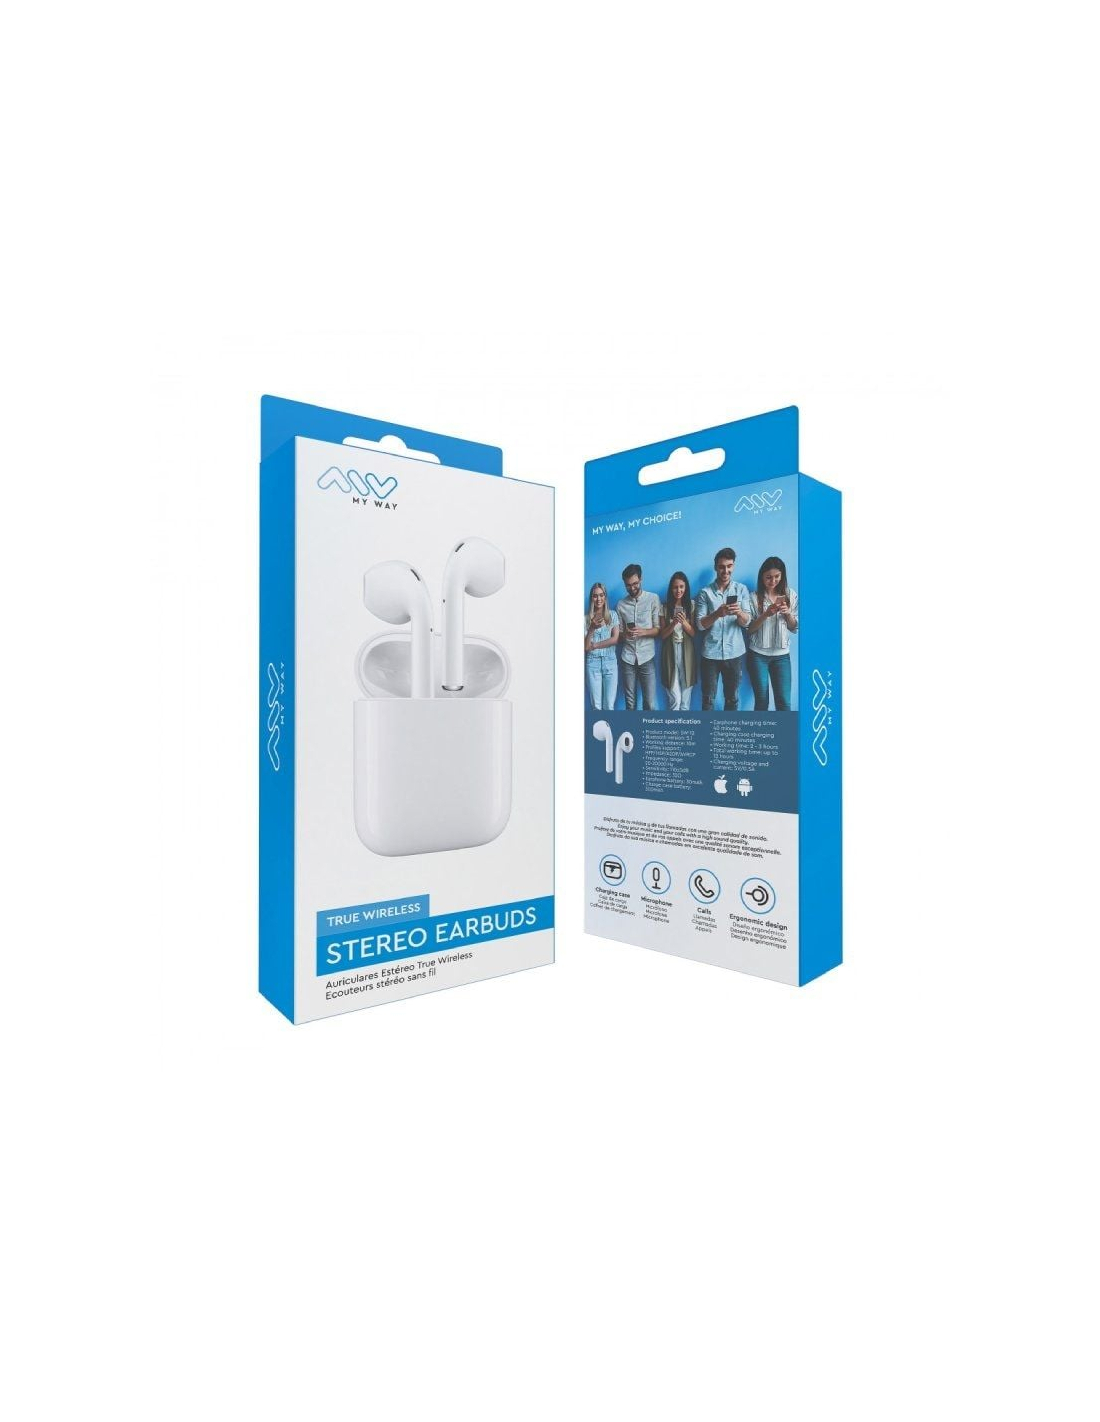 Myway Wireless Touch MWHPH0030 Auriculares Inalámbricos Blancos